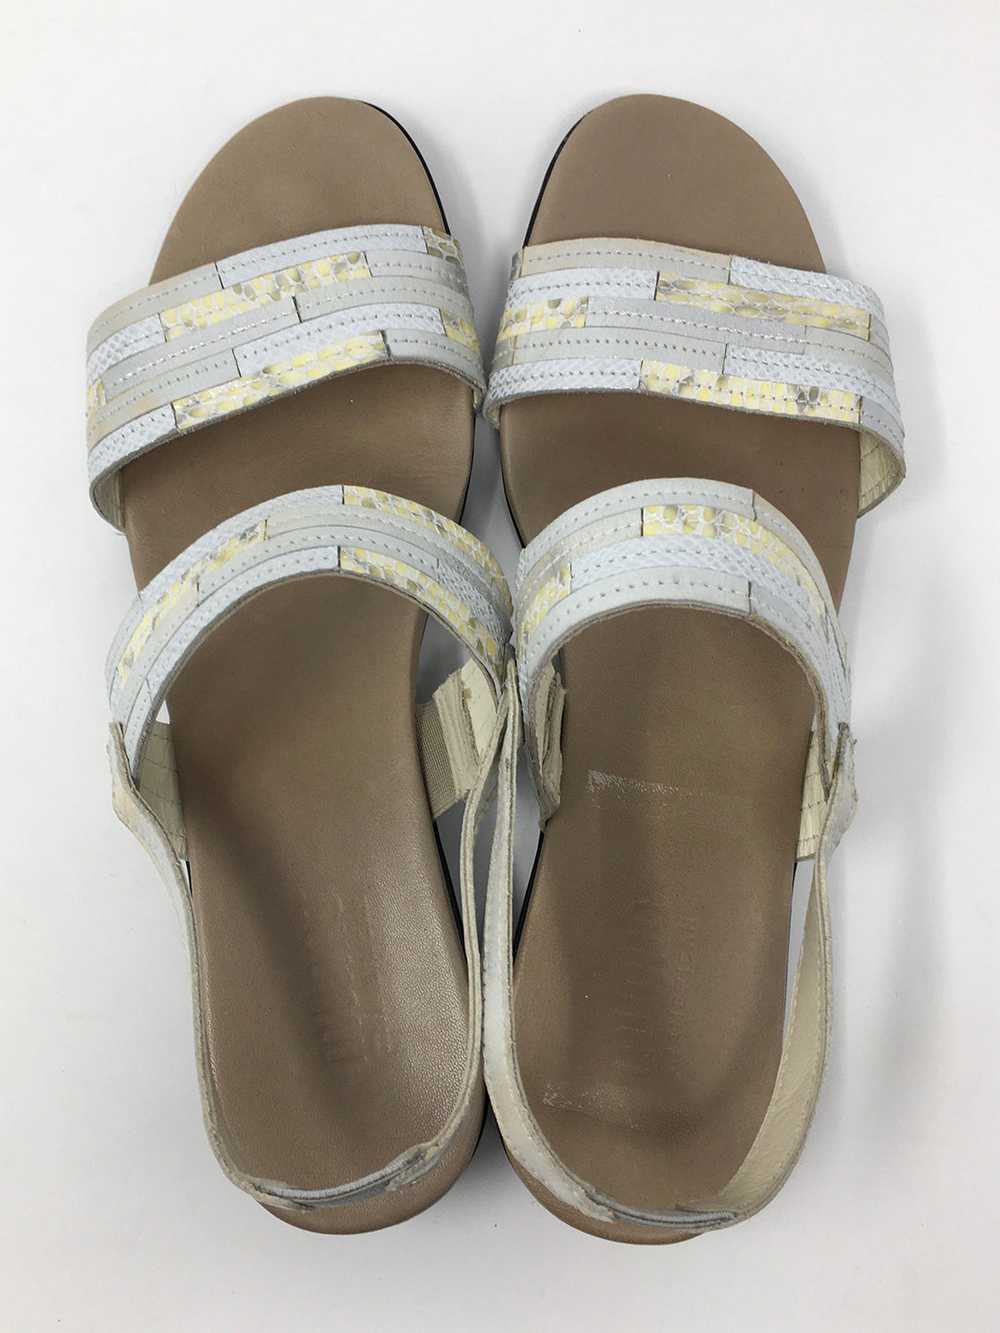 Munro Size 11 Ivory Patchwork Sandals - image 3